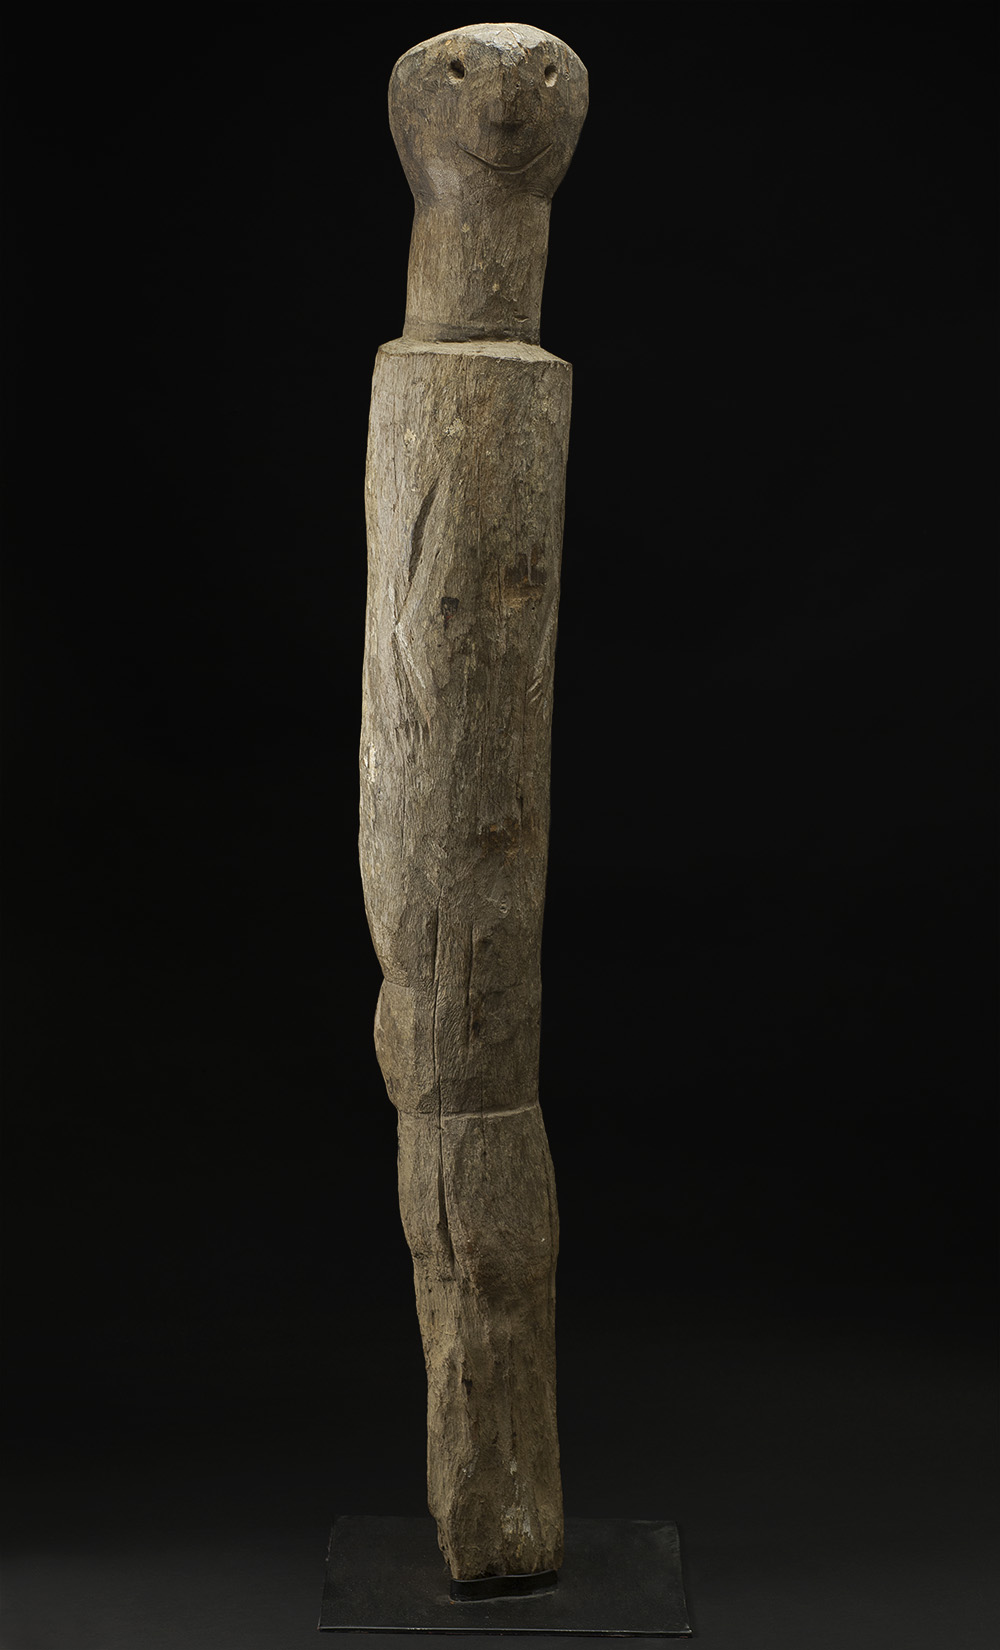   Africa    Moba Ancestral Sculpture - Moba People - Northern Togo  , Early 20th C. Wood 55 x 7 x 7 inches 139.7 x 17.8 x 17.8 cm Af 334 